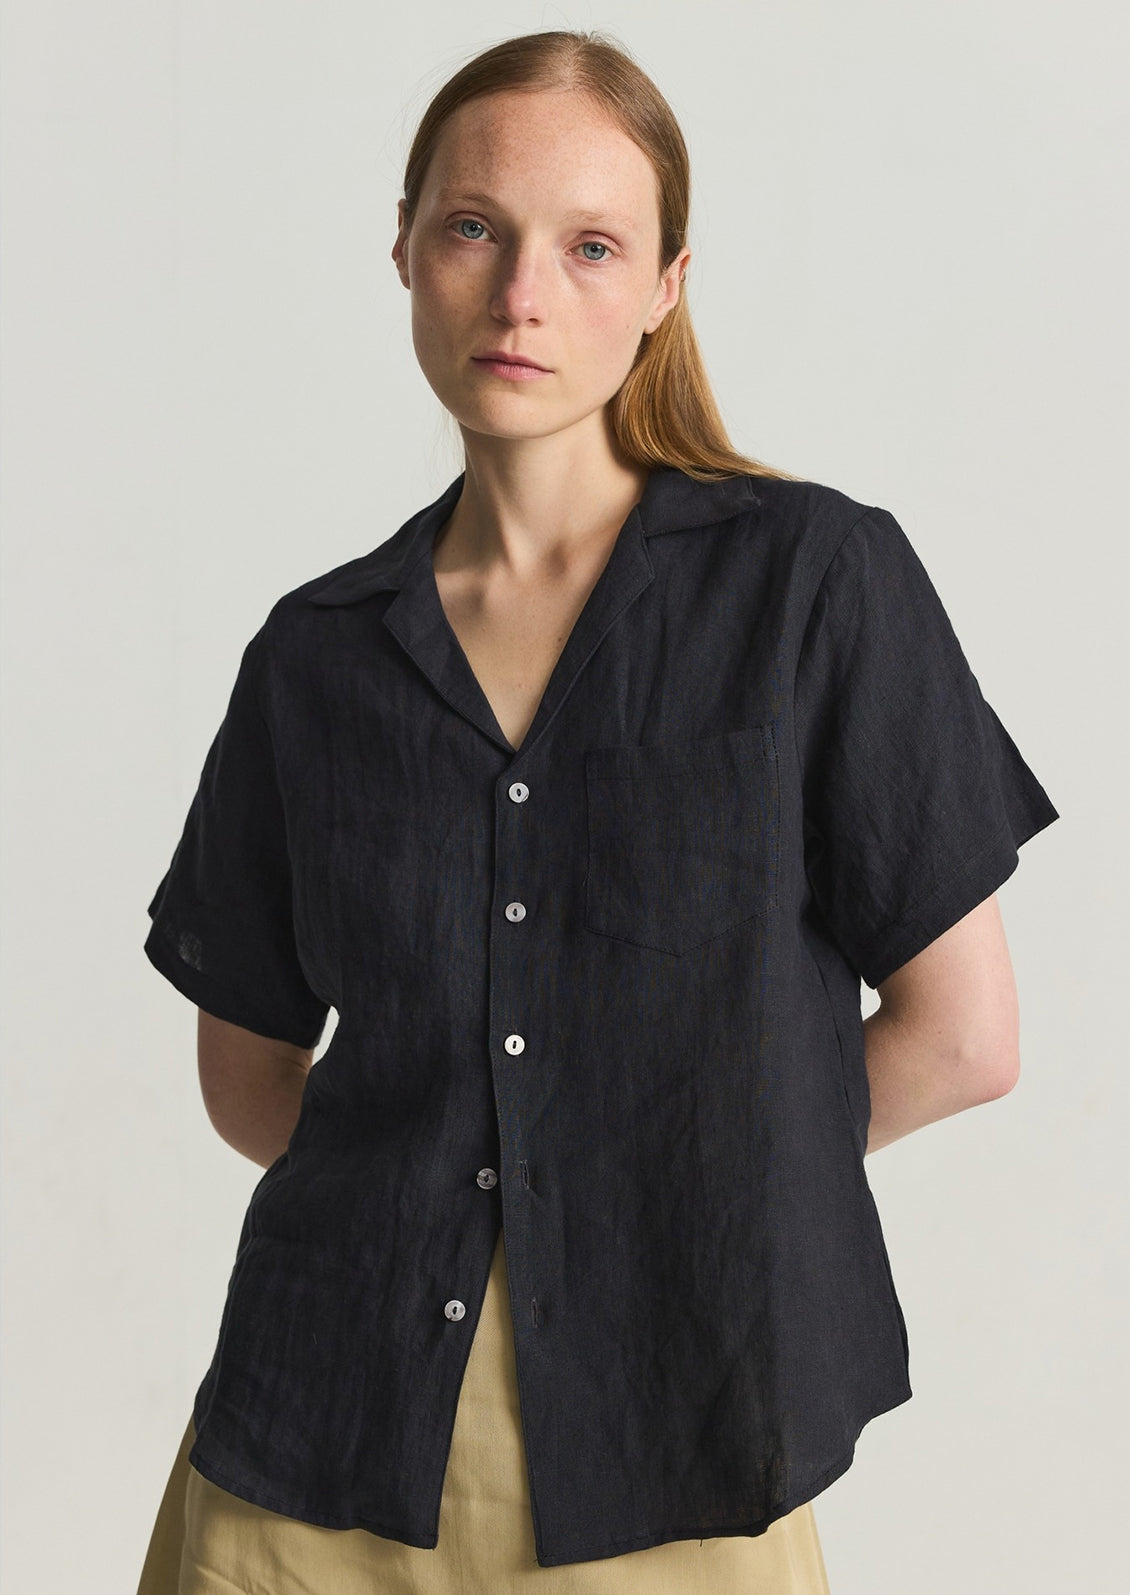 A woman in a black linen shortsleeved button-up. 